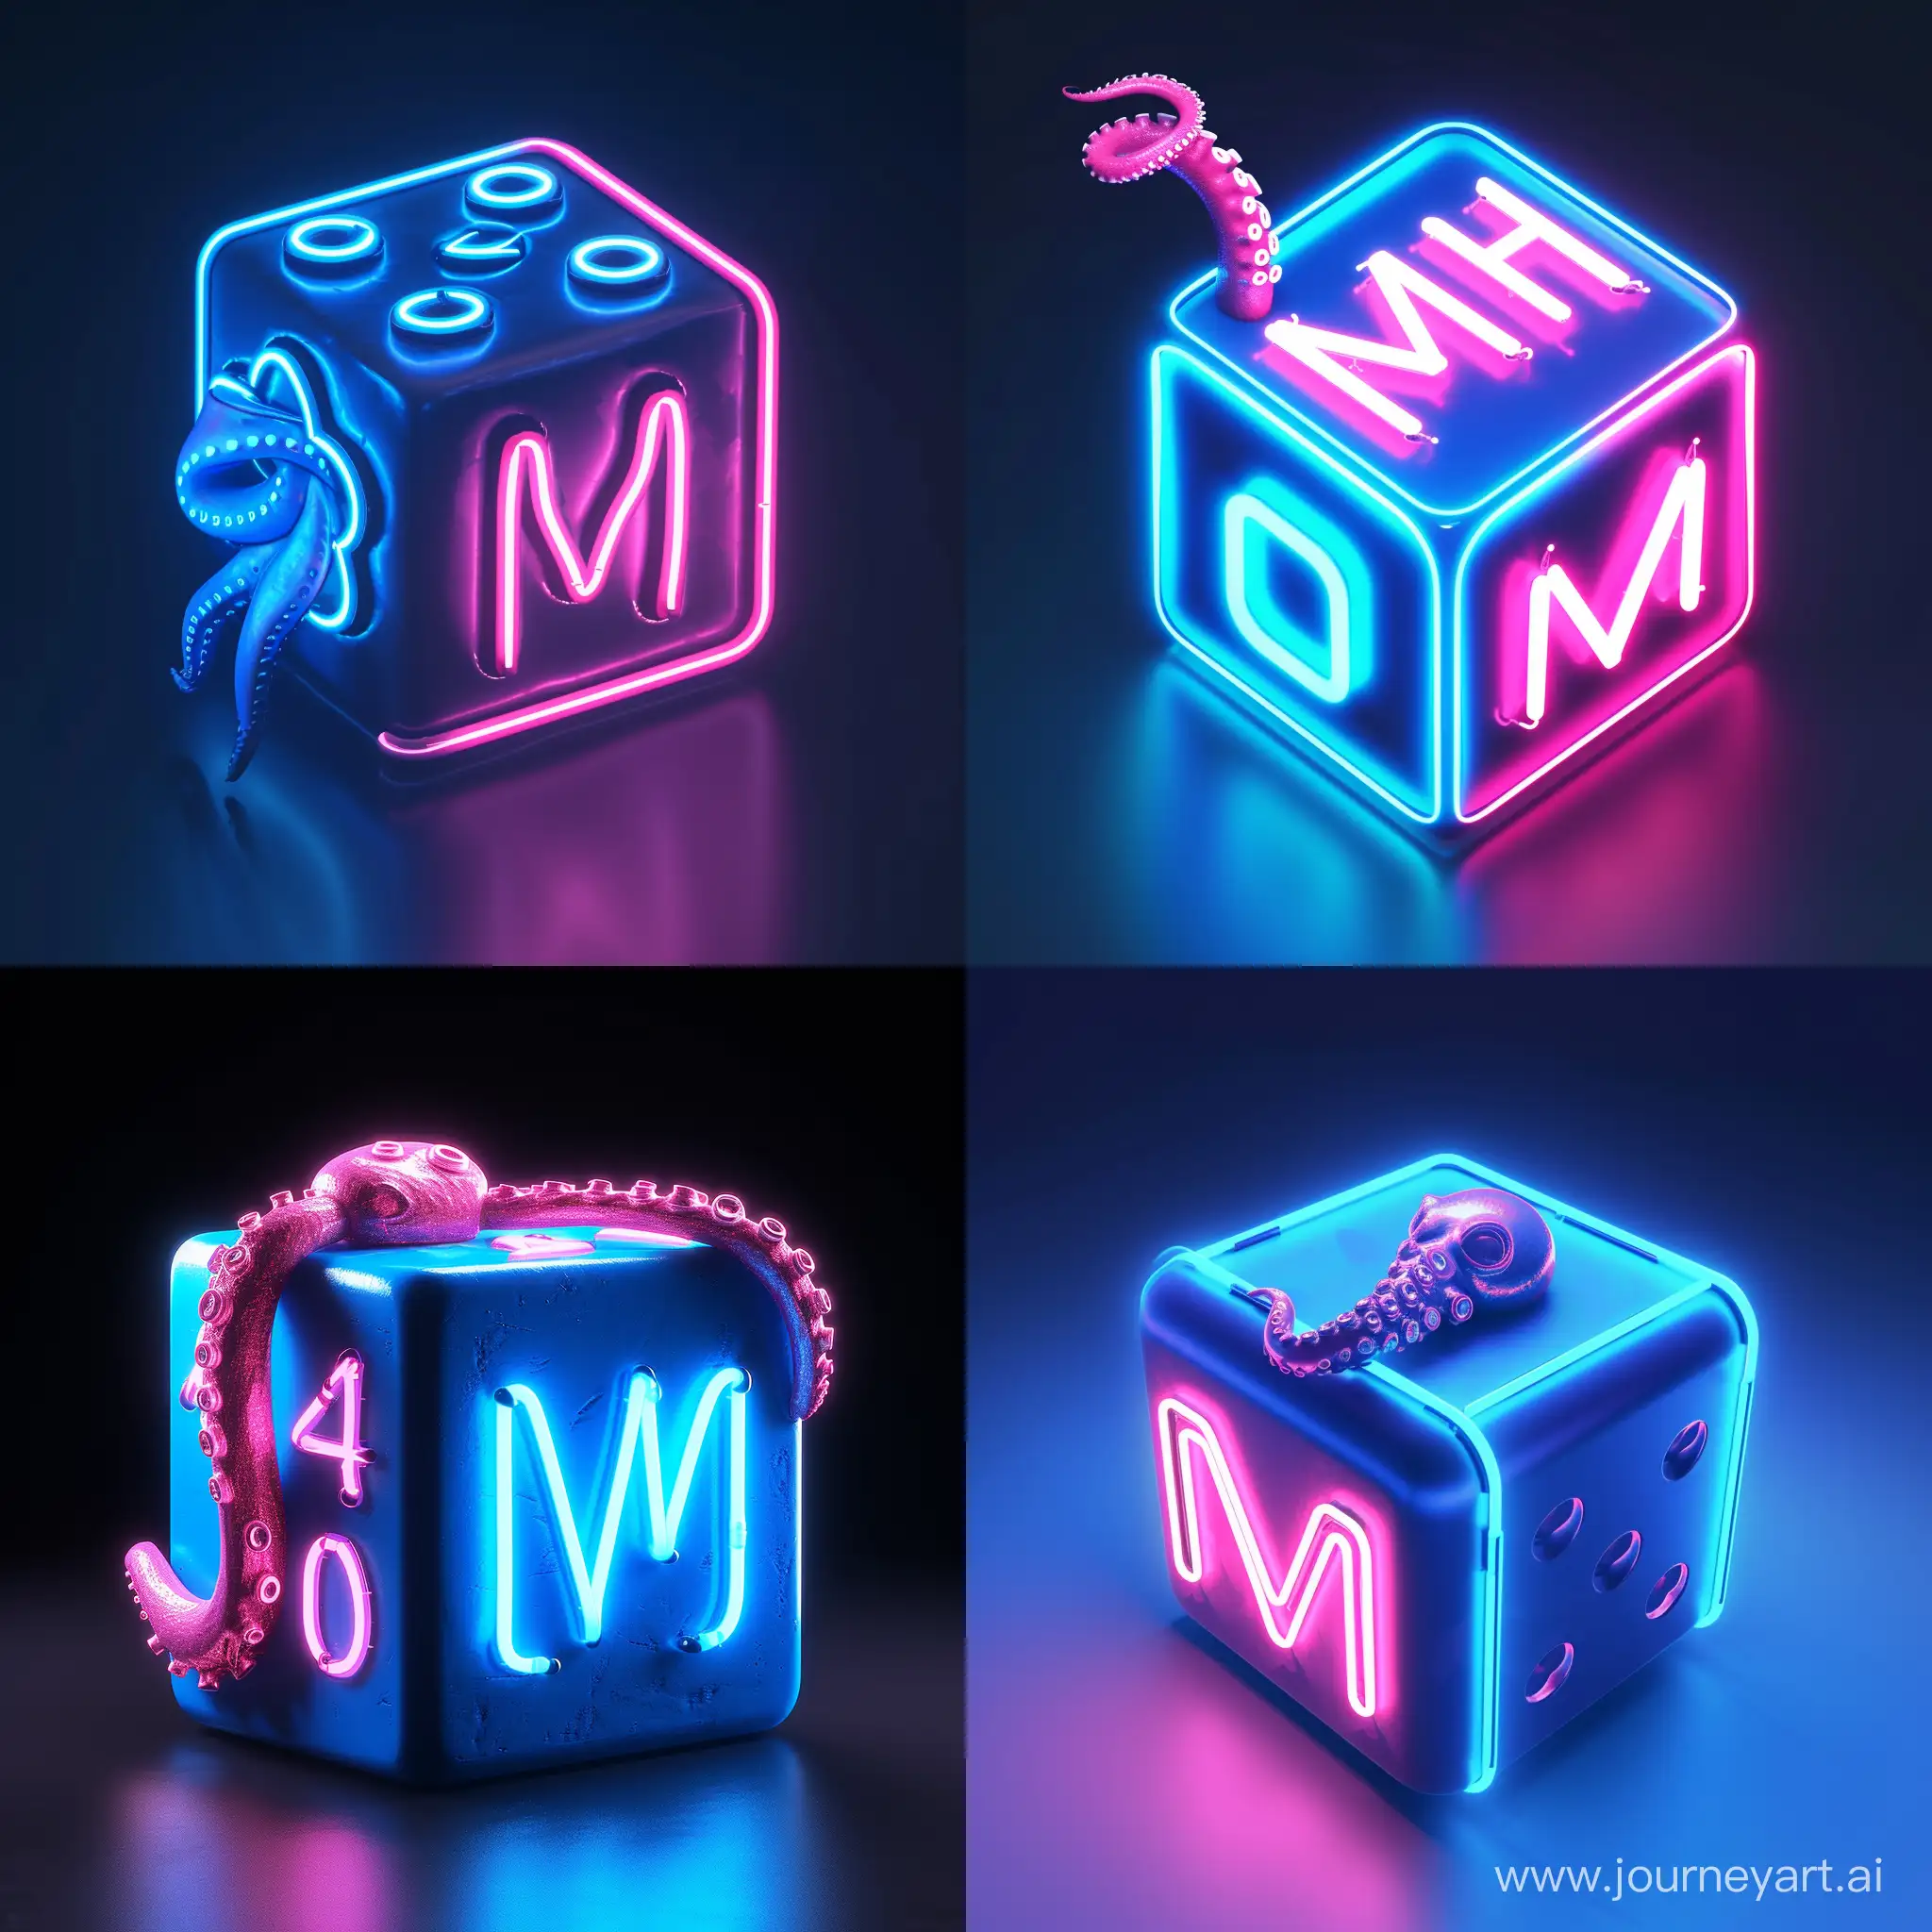 Vibrant-3D-Neon-Bar-Logo-with-MM-Letters-and-Dice